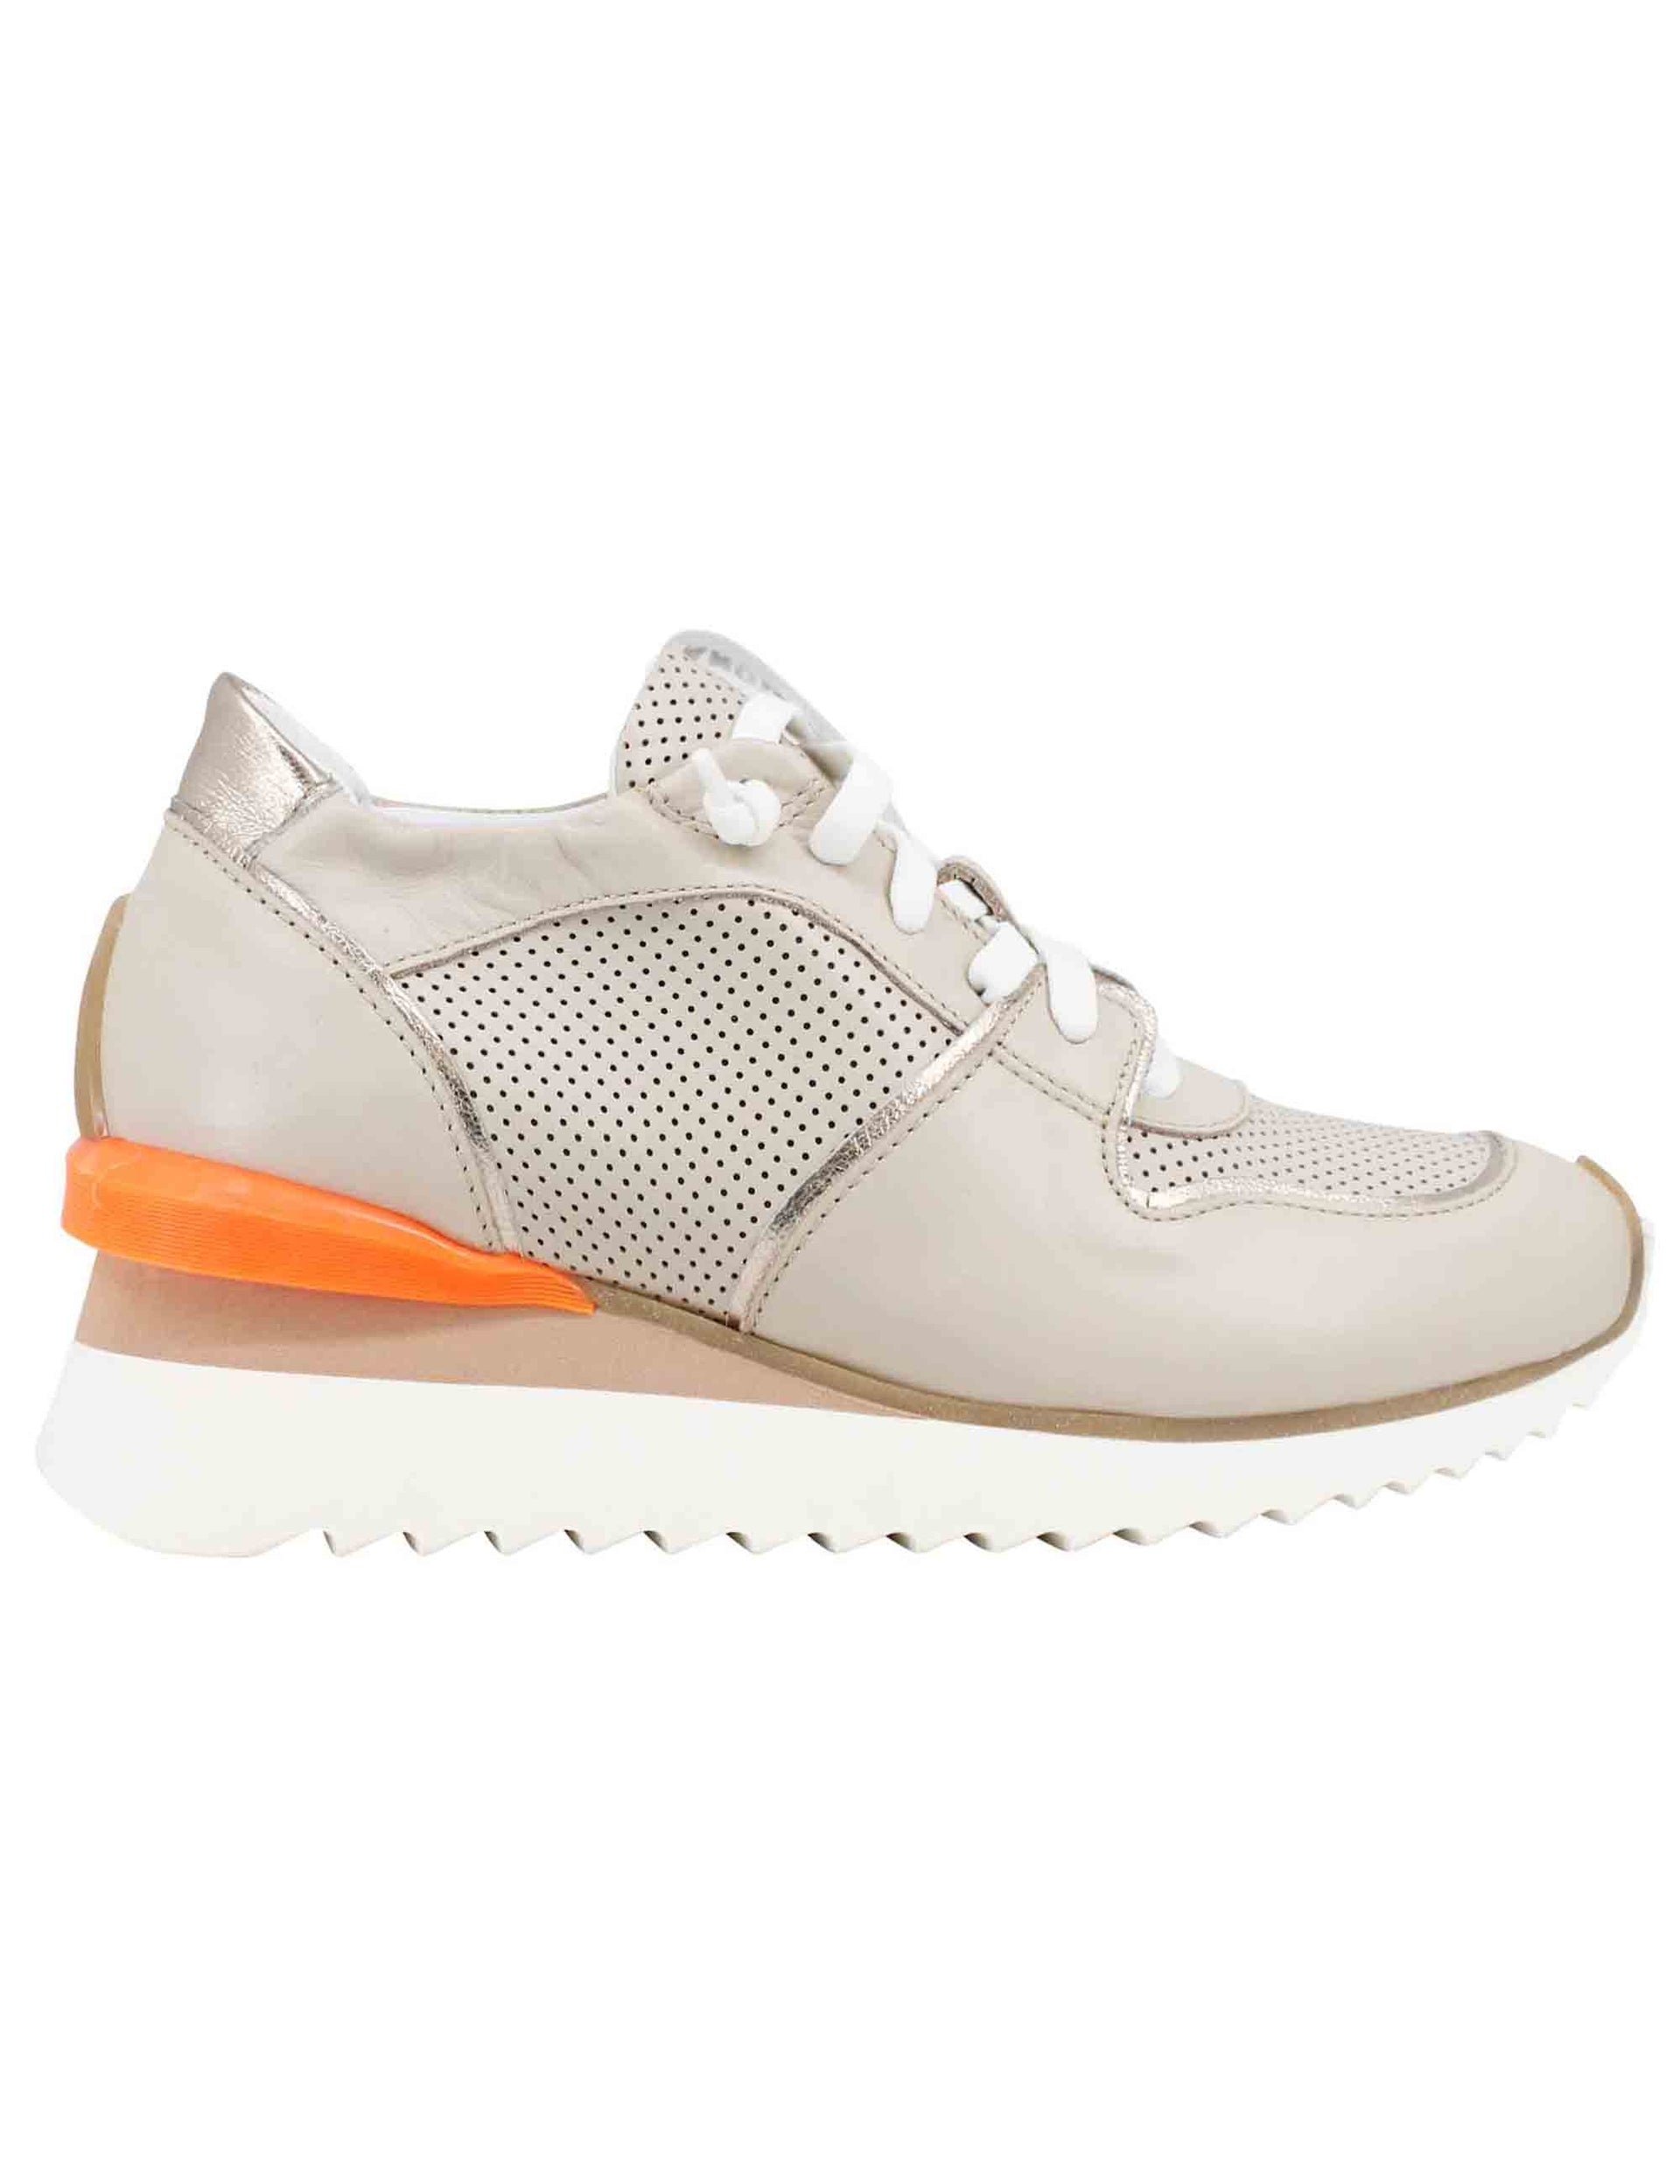 Women's beige leather sneakers with internal wedge